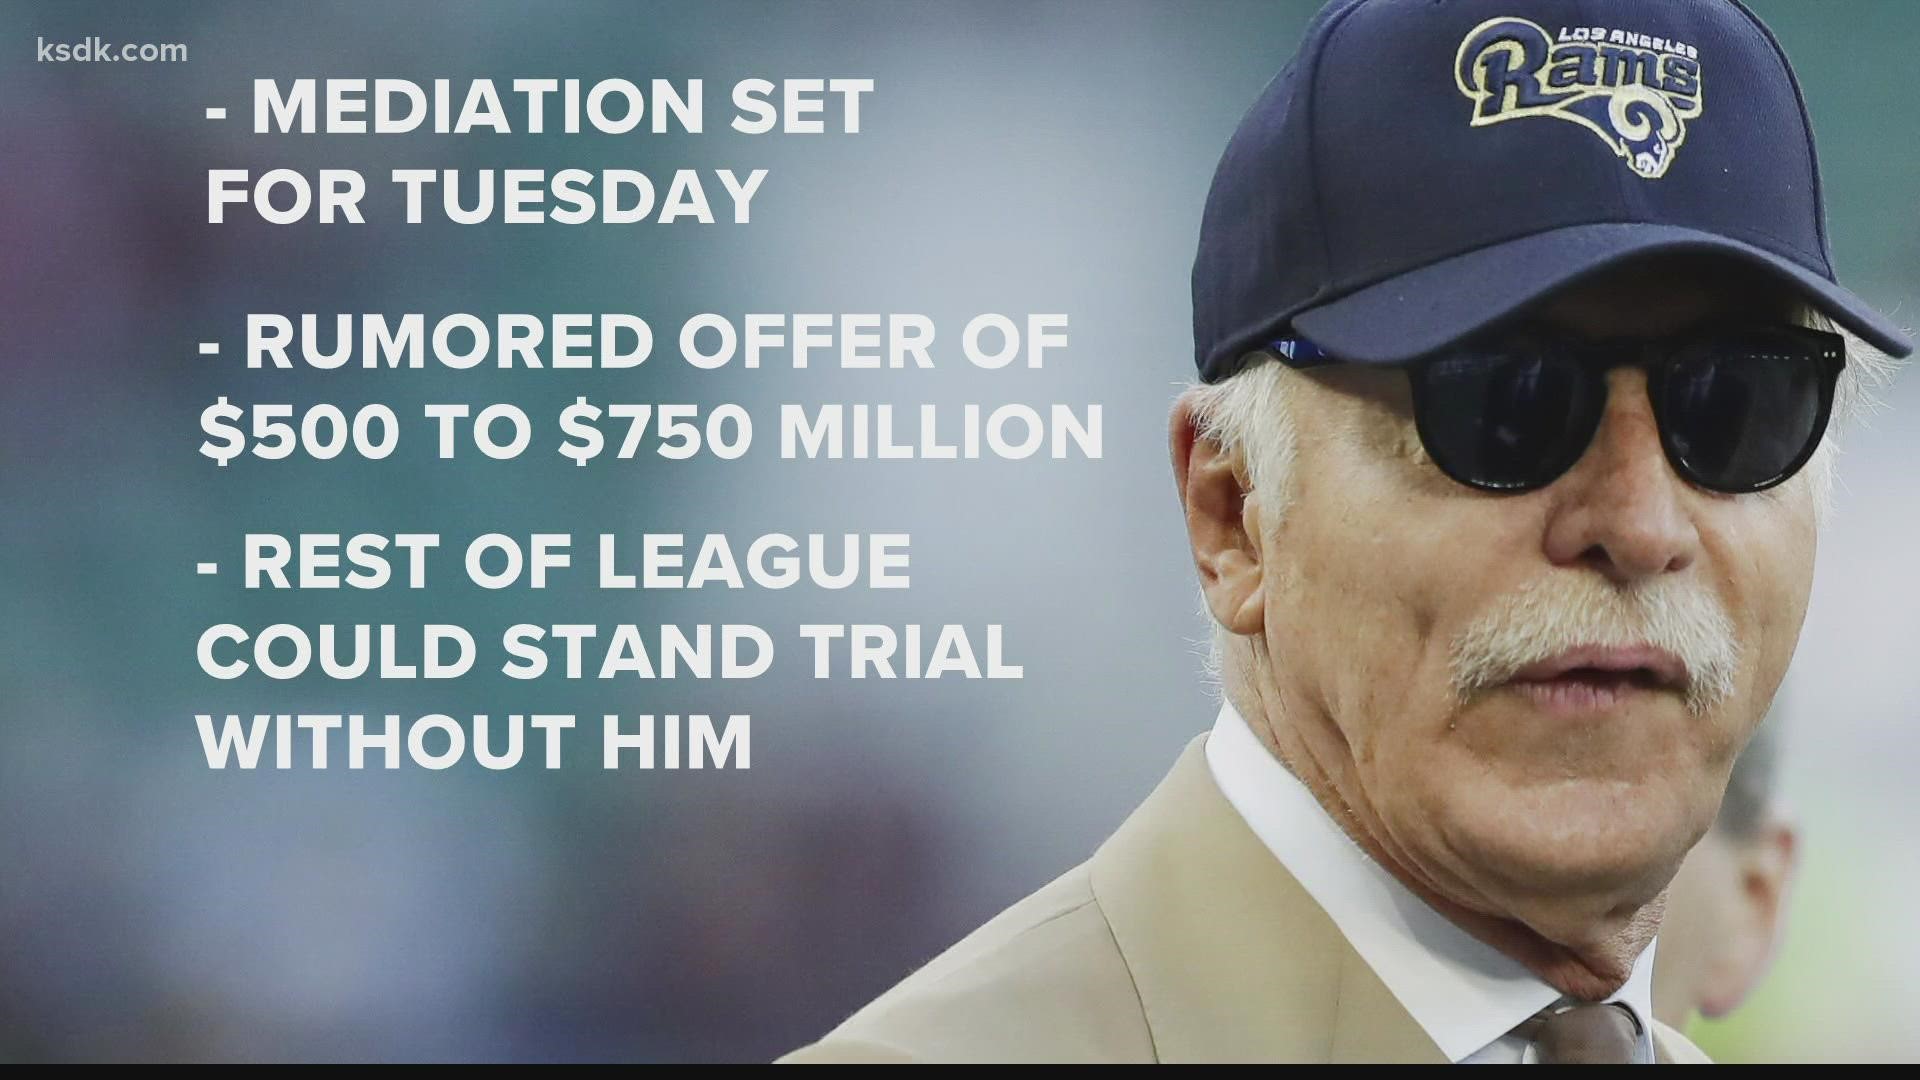 The Sports Business Journal reported that Kroenke's representatives think they can settle his involvement in the case for somewhere between $500 and $750 million